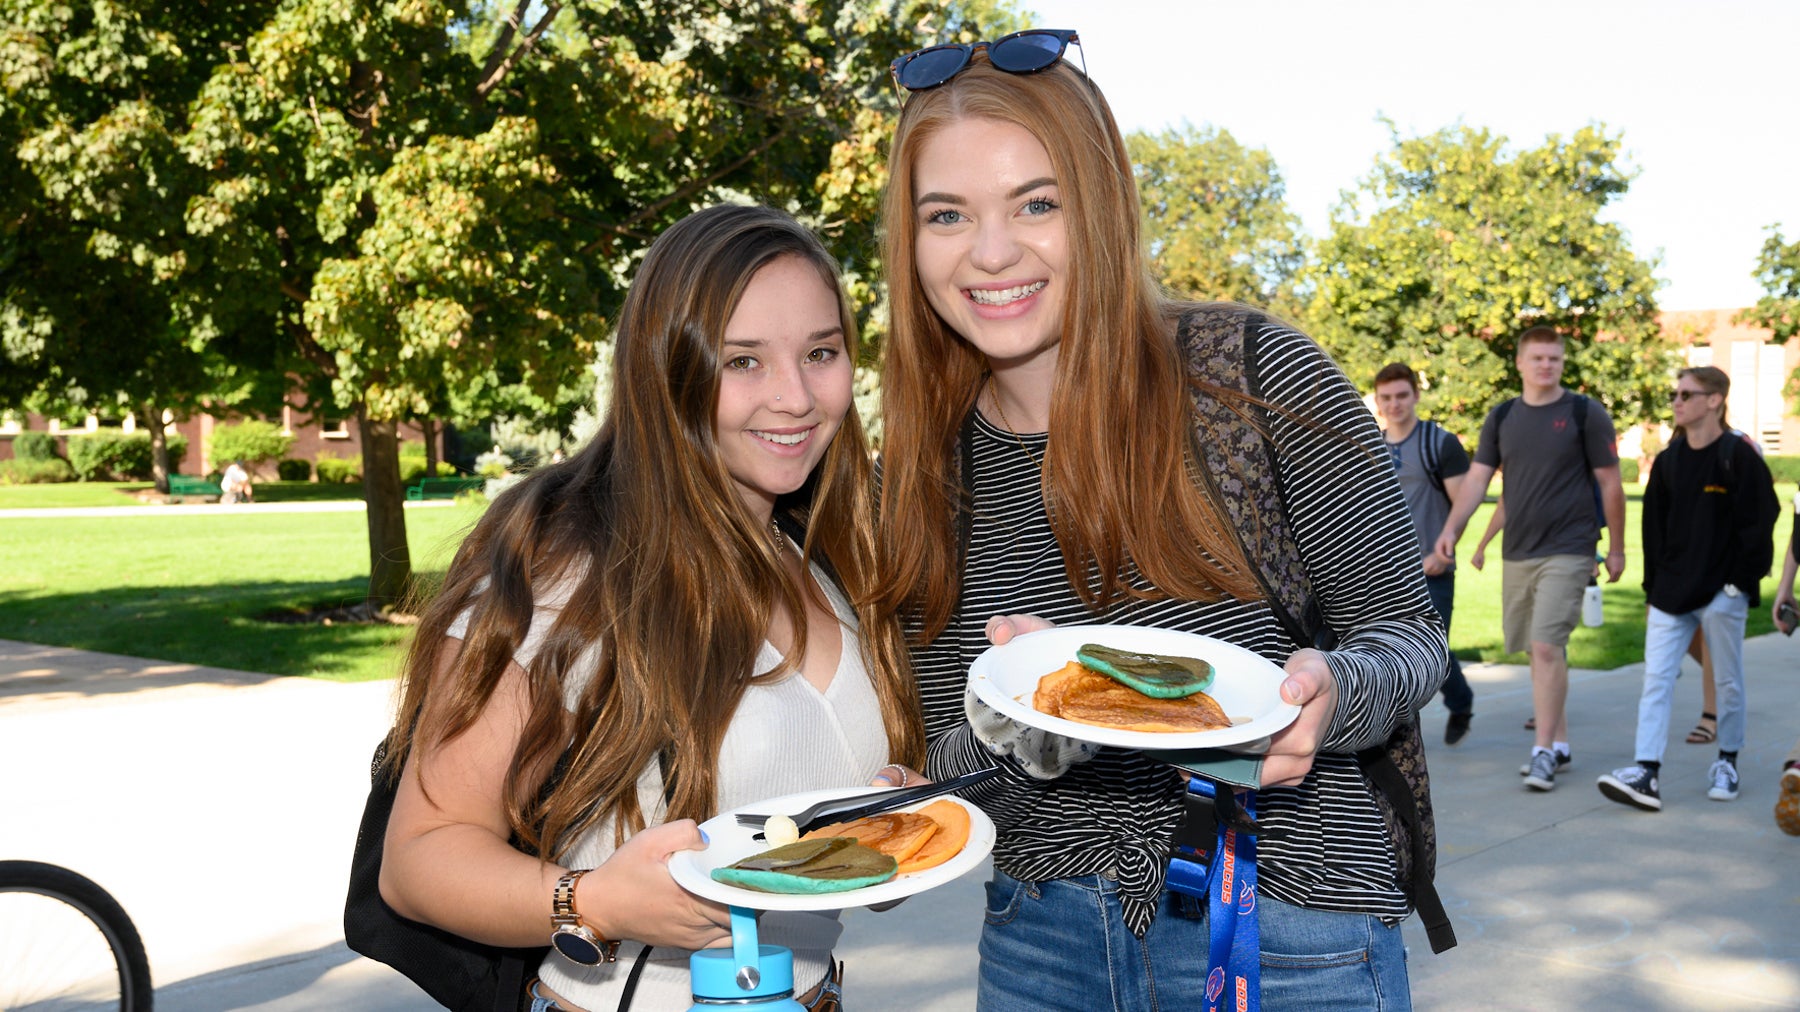 Two Boise State students smiling while holding pancakes.